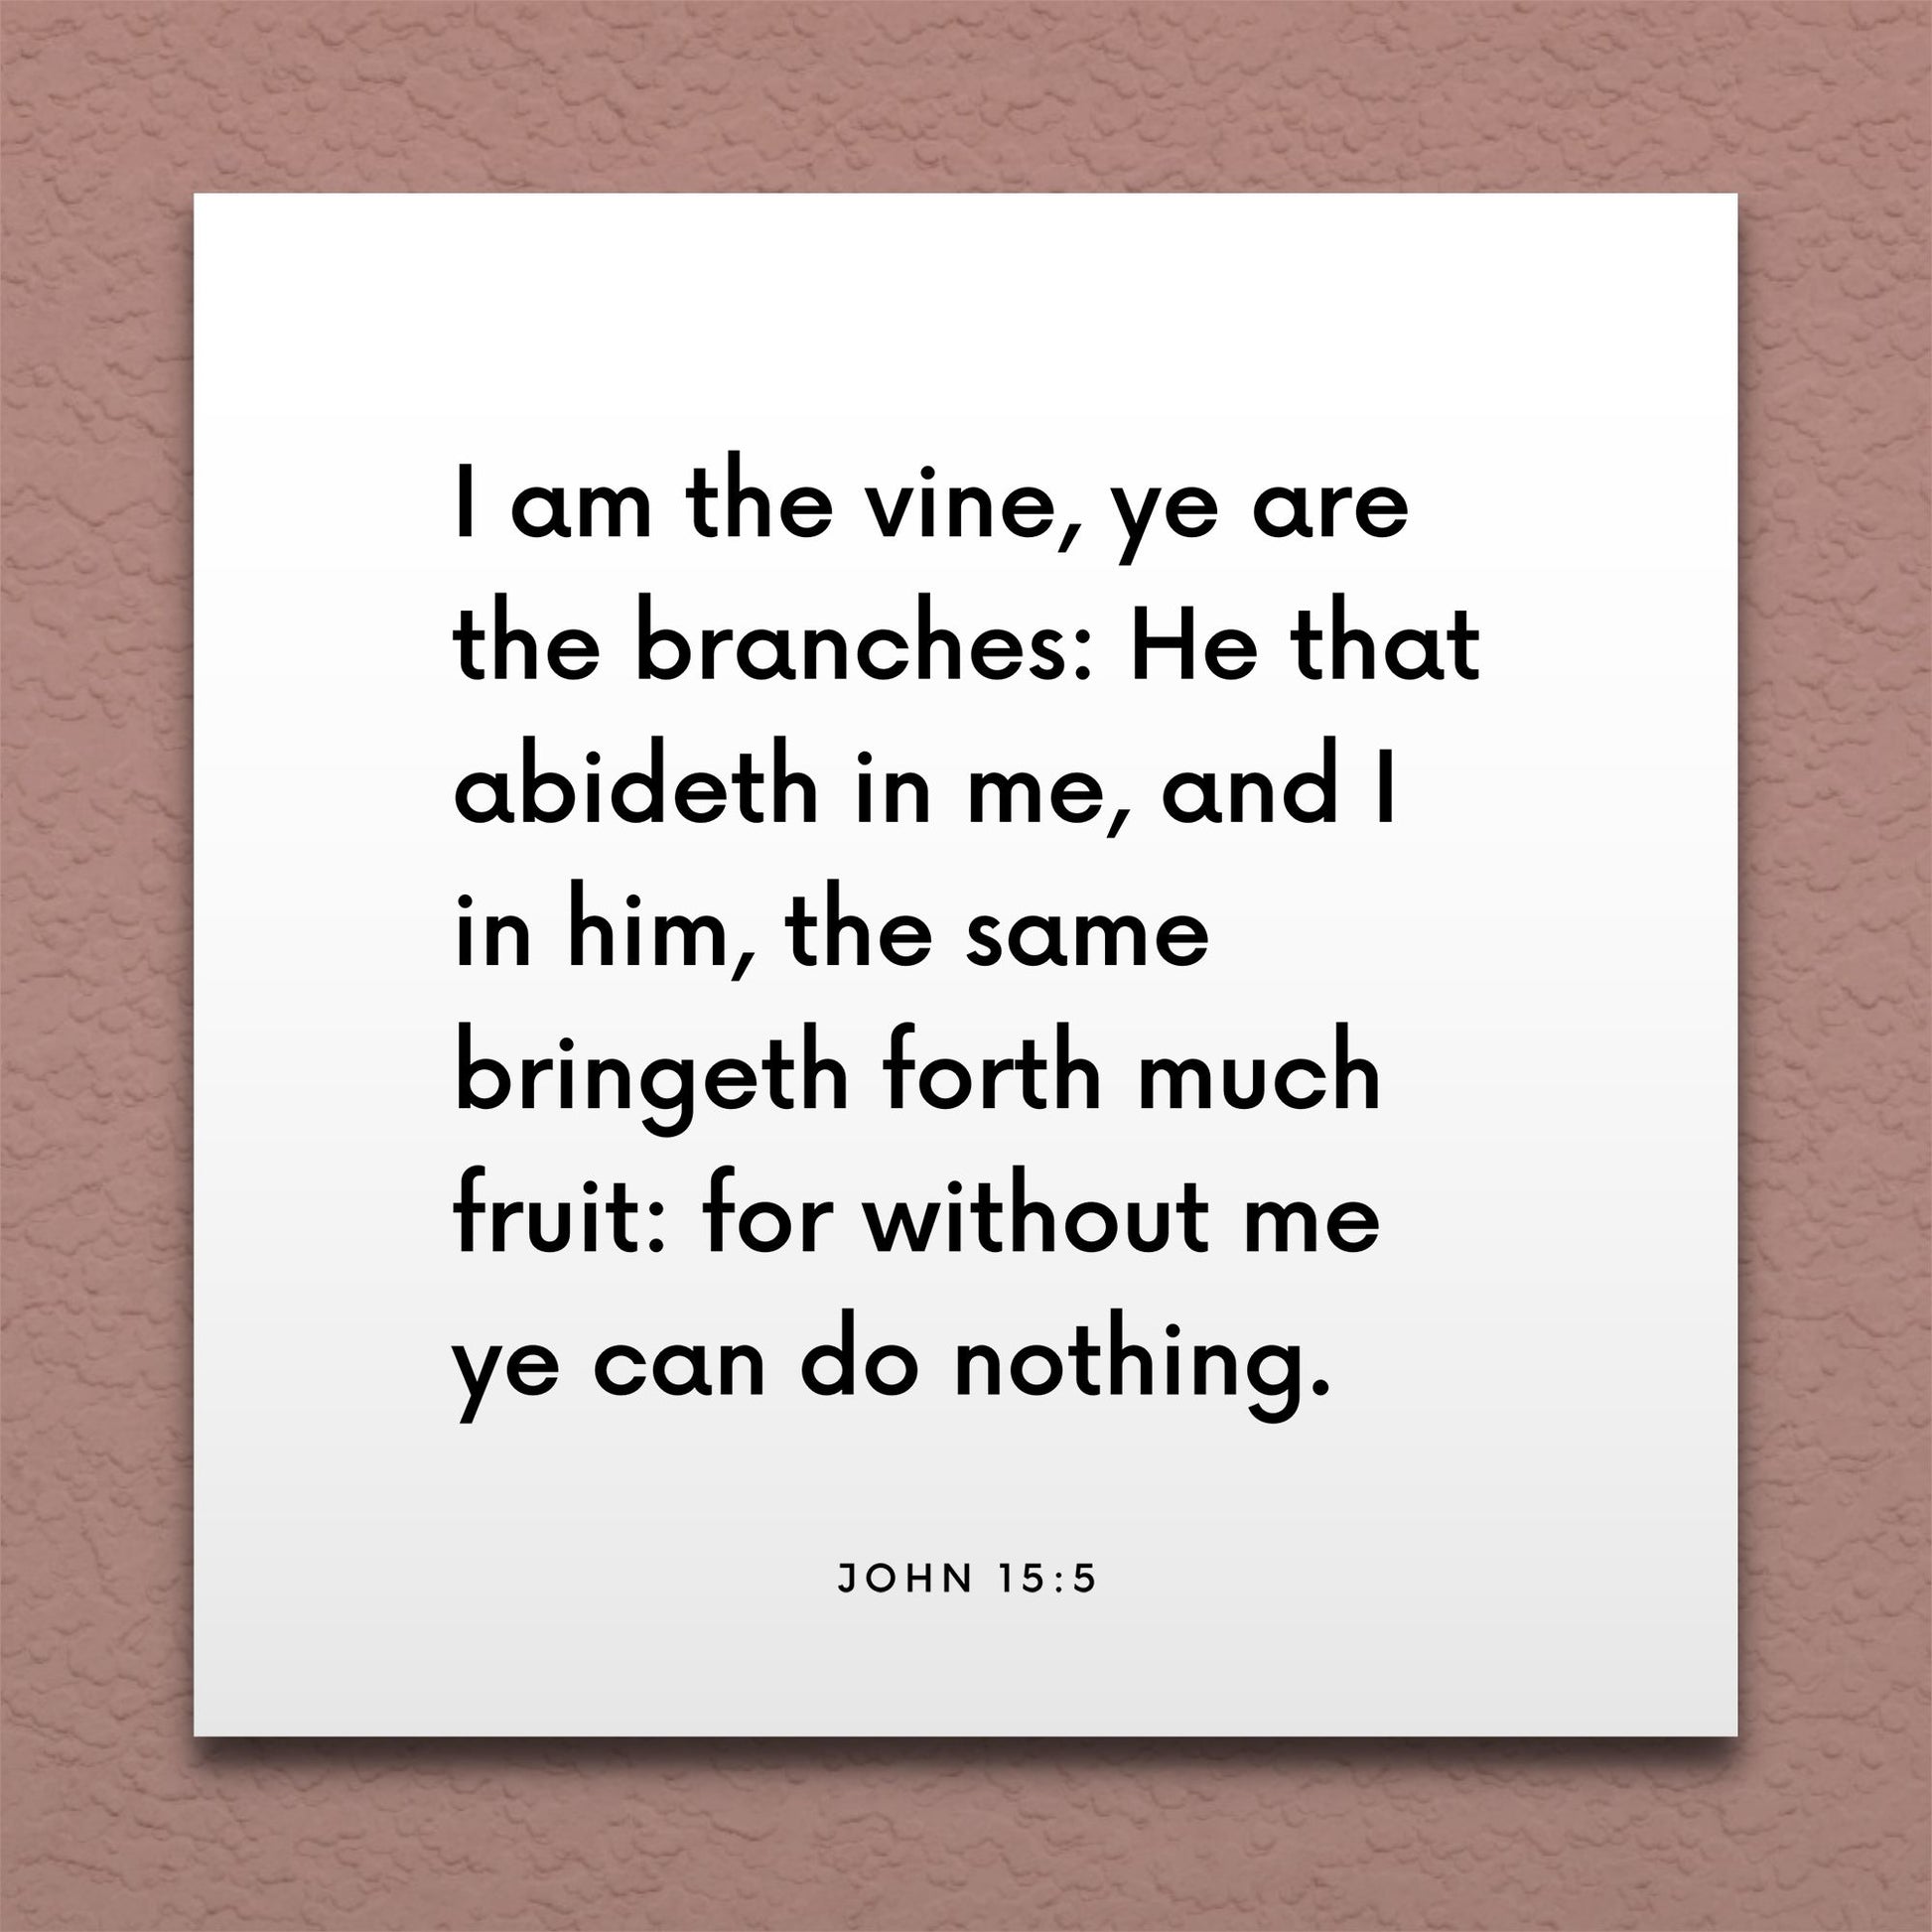 Wall-mounted scripture tile for John 15:5 - "I am the vine, ye are the branches"